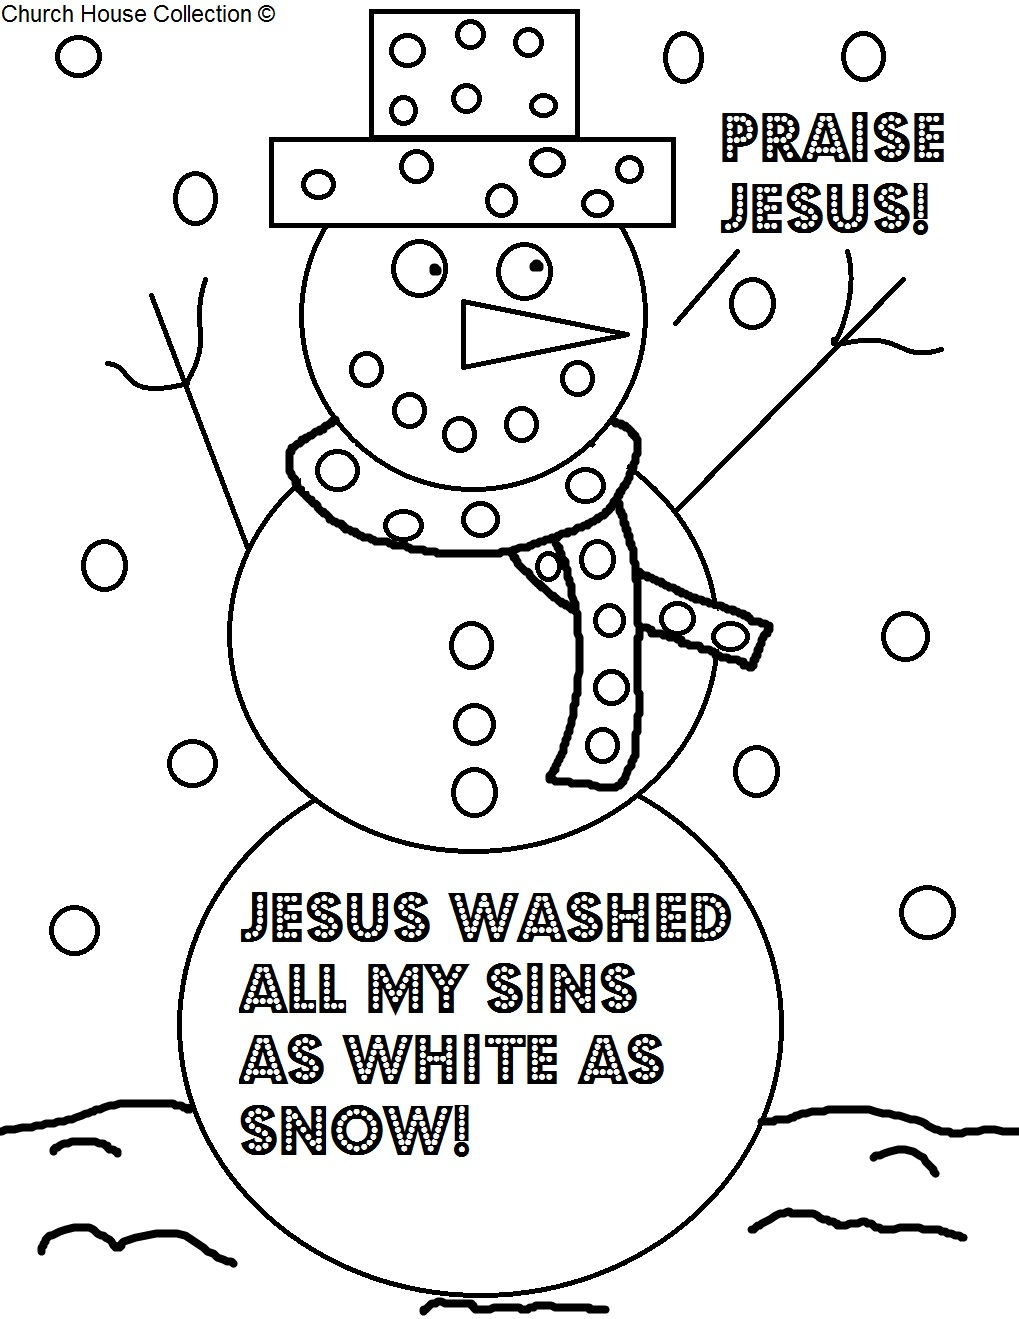 Coloring Pages : Sunday School Coloringges Noahgesfree About - Free Printable Sunday School Coloring Pages